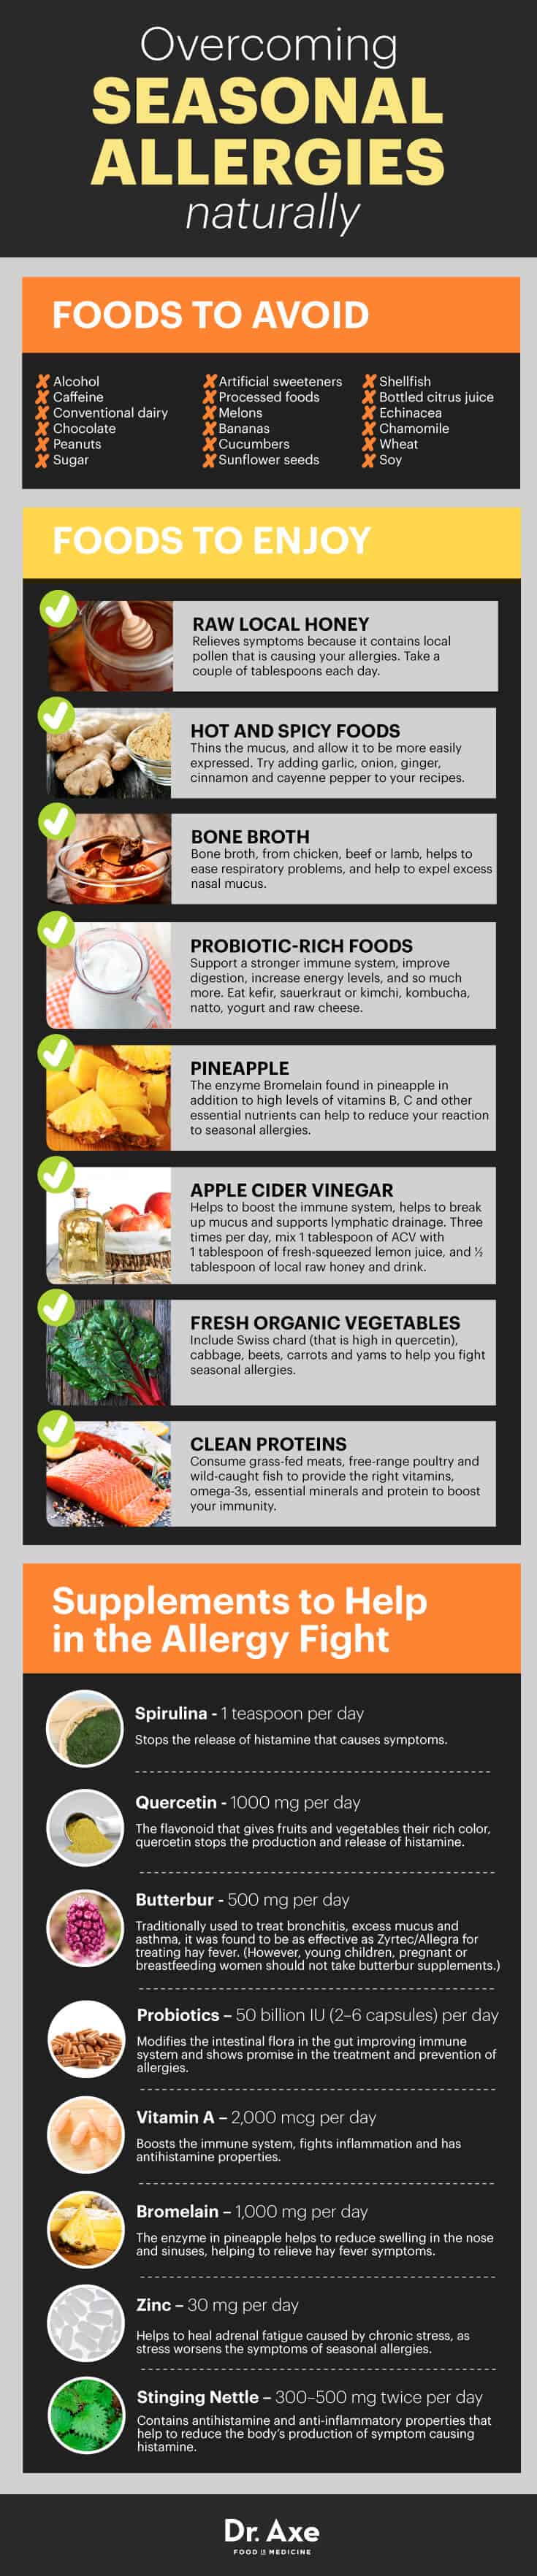 Natural remedies cures for seasonal allergies infographic chart